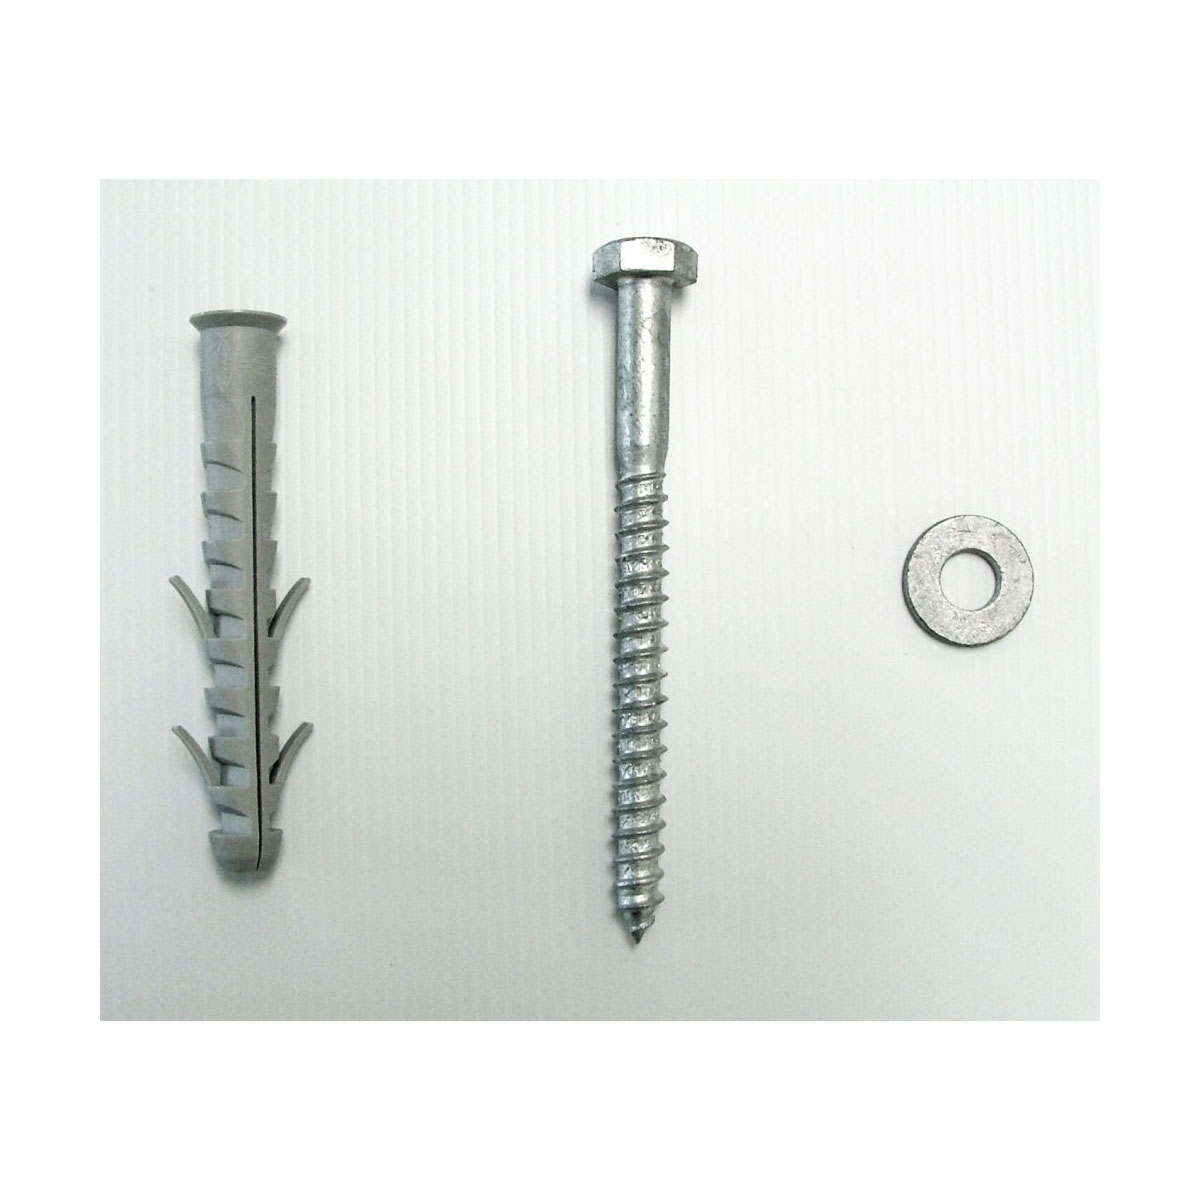 Speed Bump Fixings Expandable Screw Bolts Set of 4